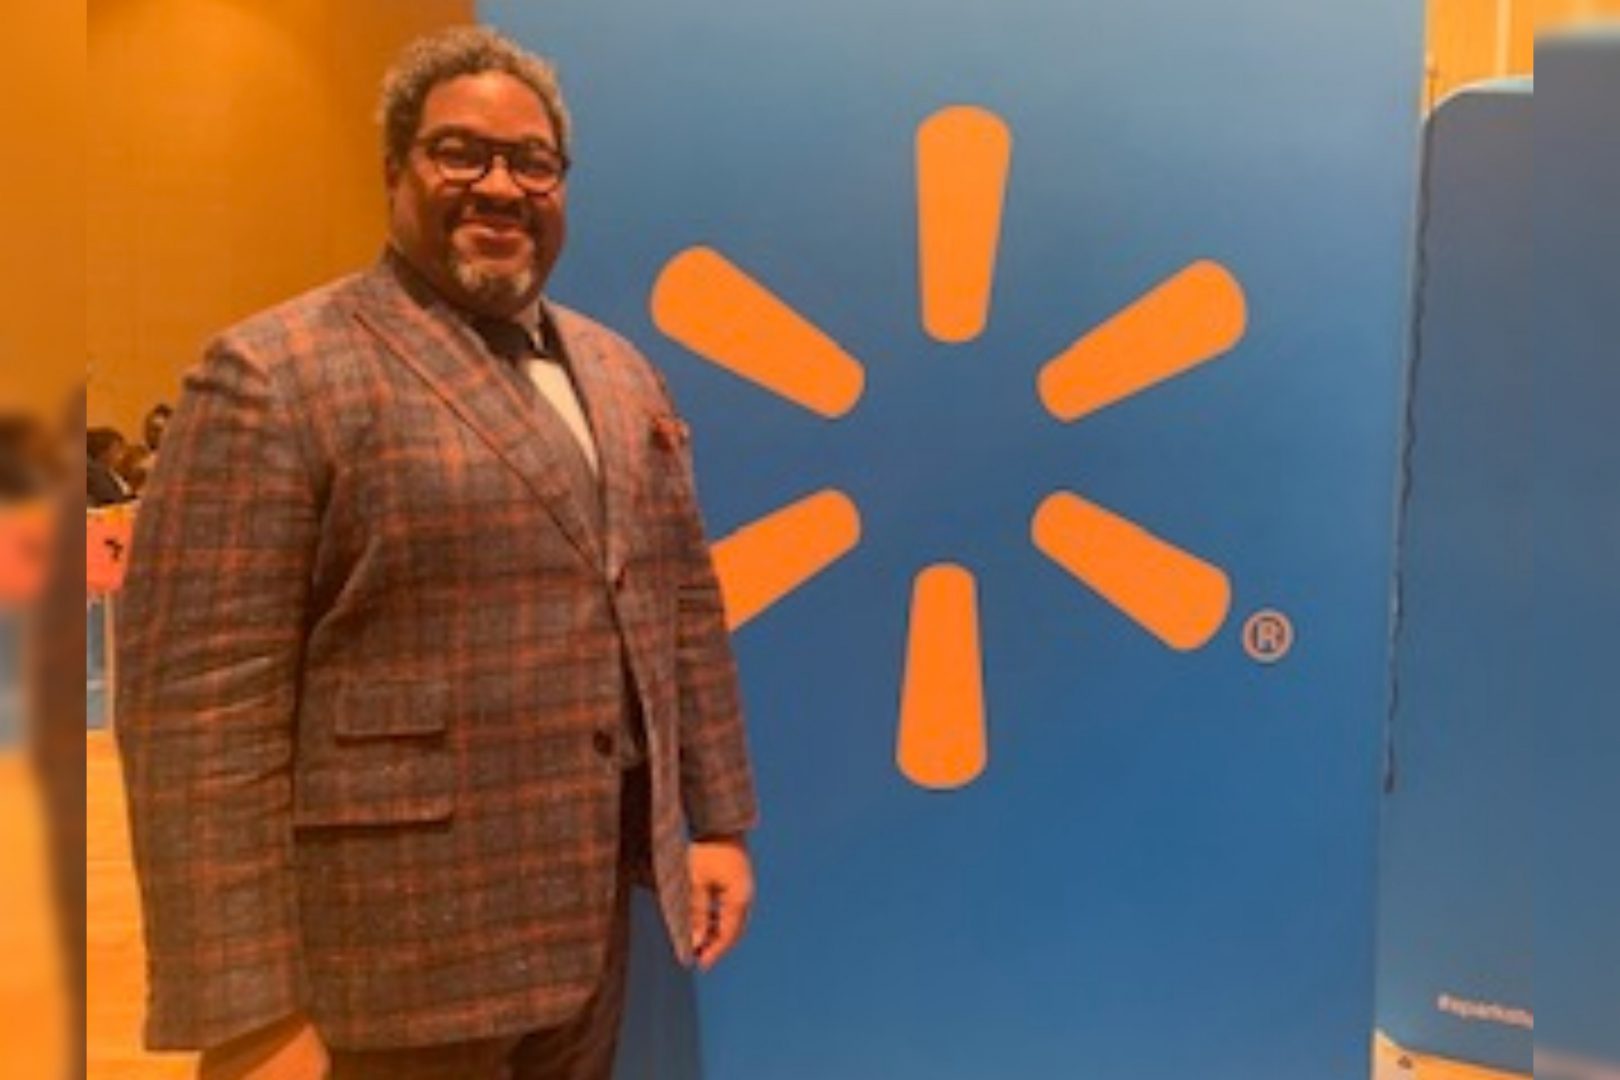 Walmart's Tony Waller explains how business growth is defined by diversity